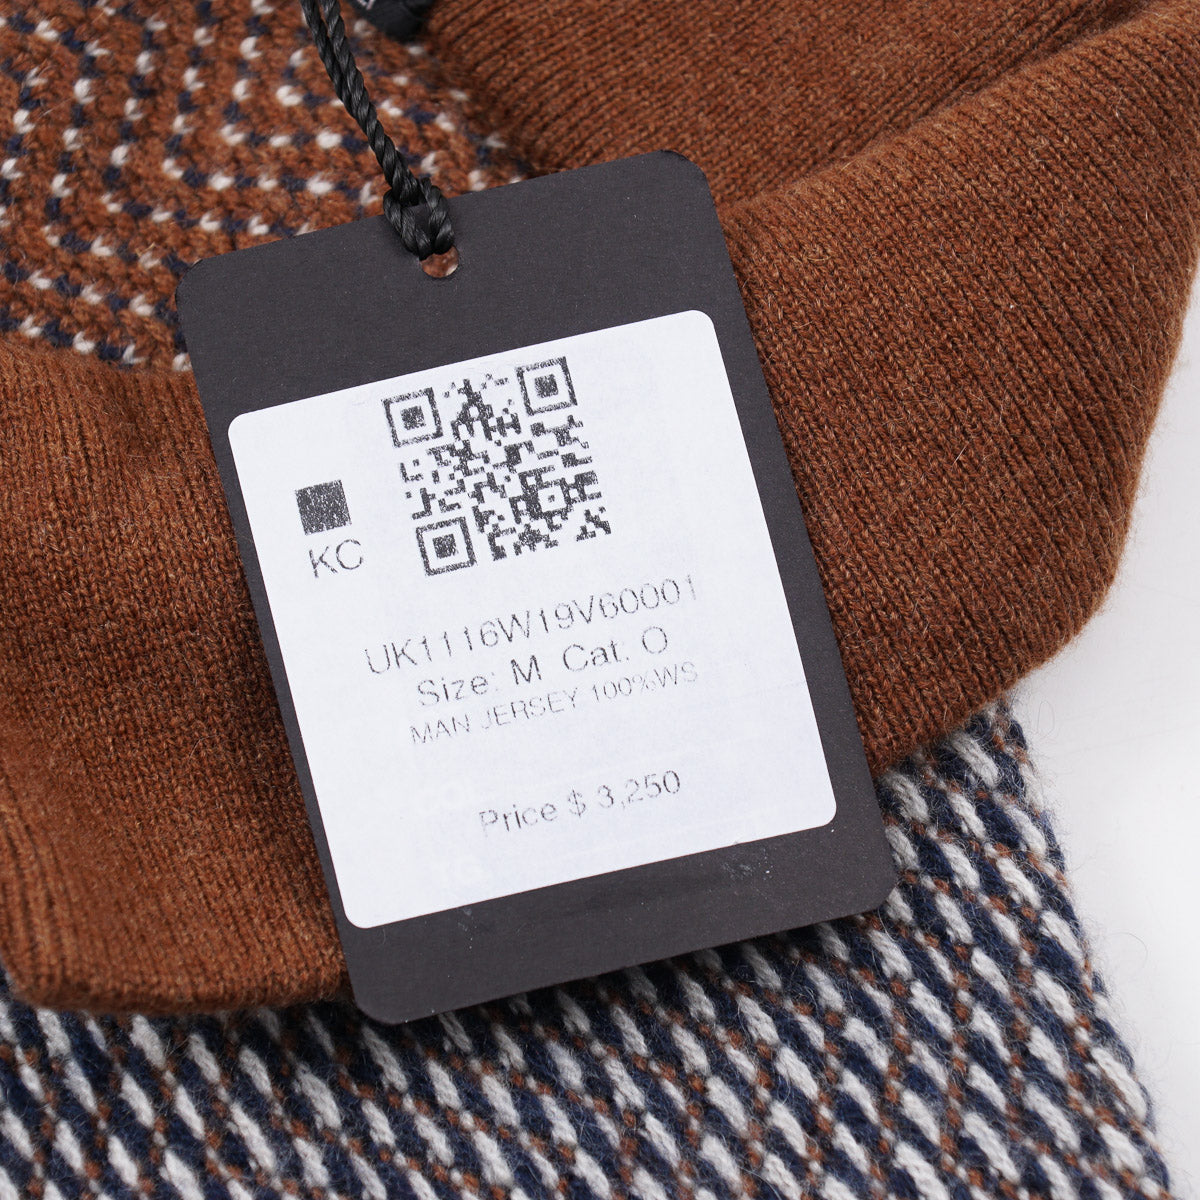 Kiton Knit Cashmere Sweater with Collar - Top Shelf Apparel